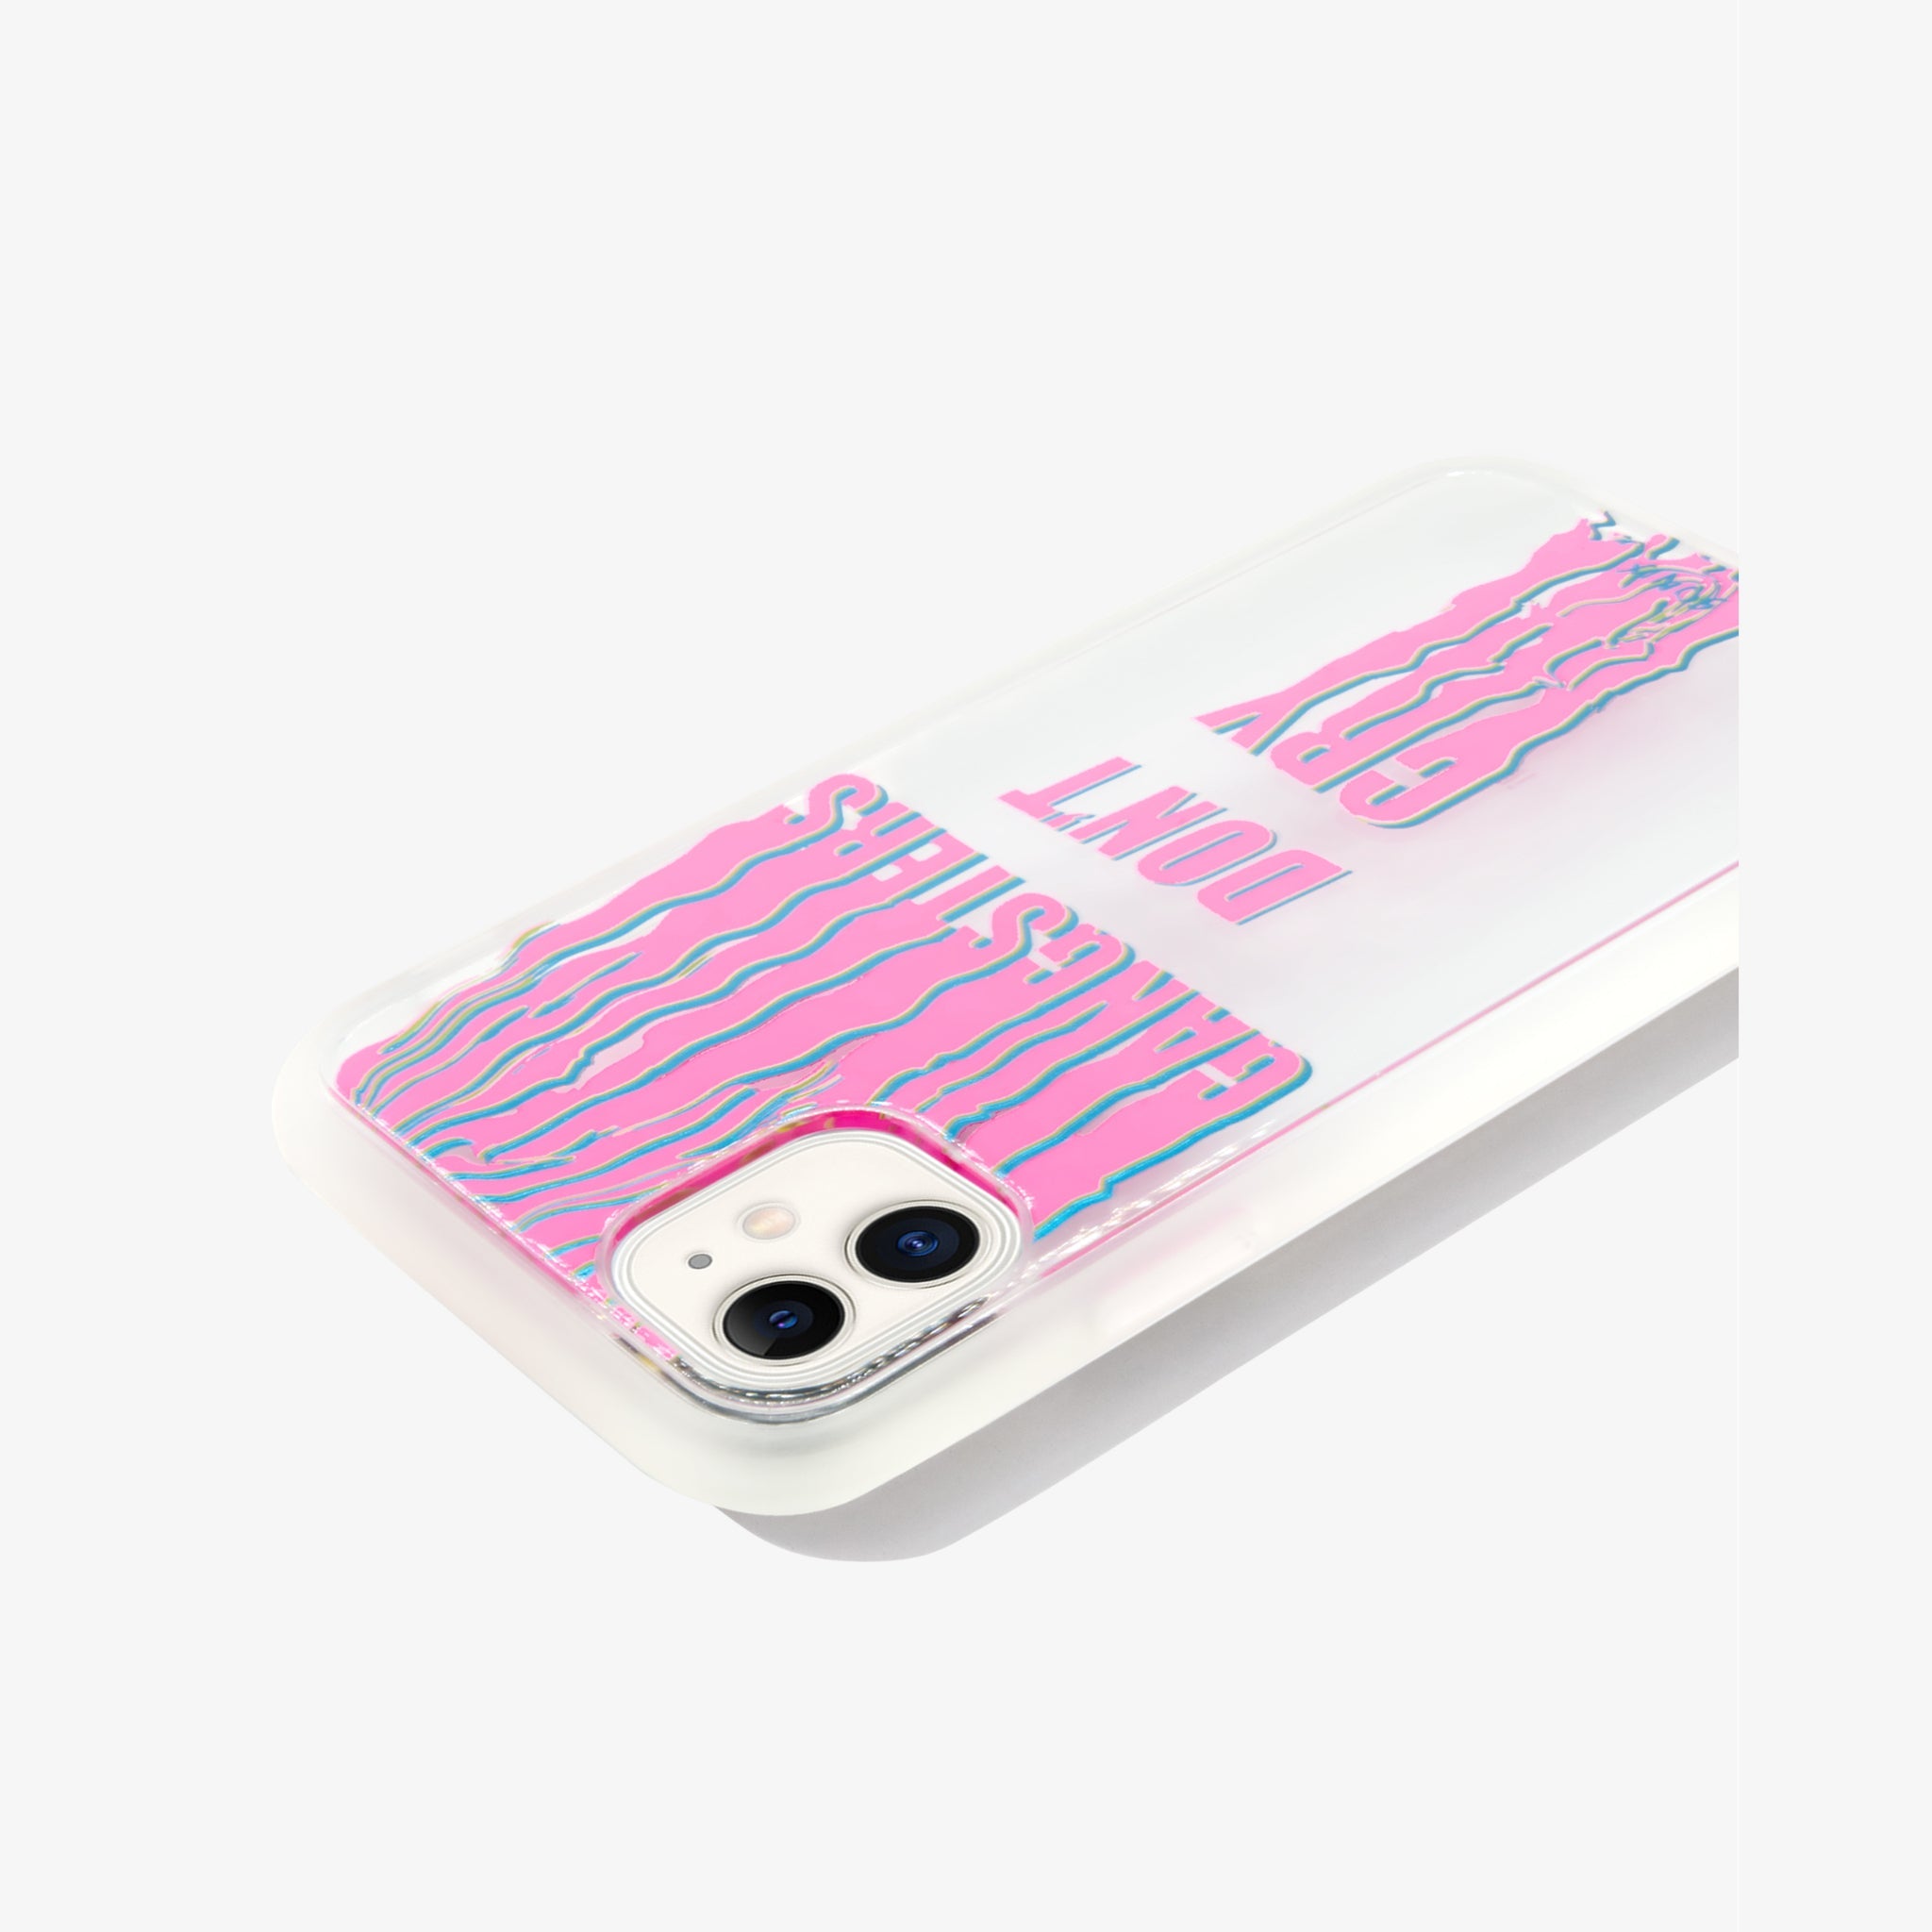 "gangsters dont cry" written in pink and blue wavey lettering shown on an iphone 11 side view